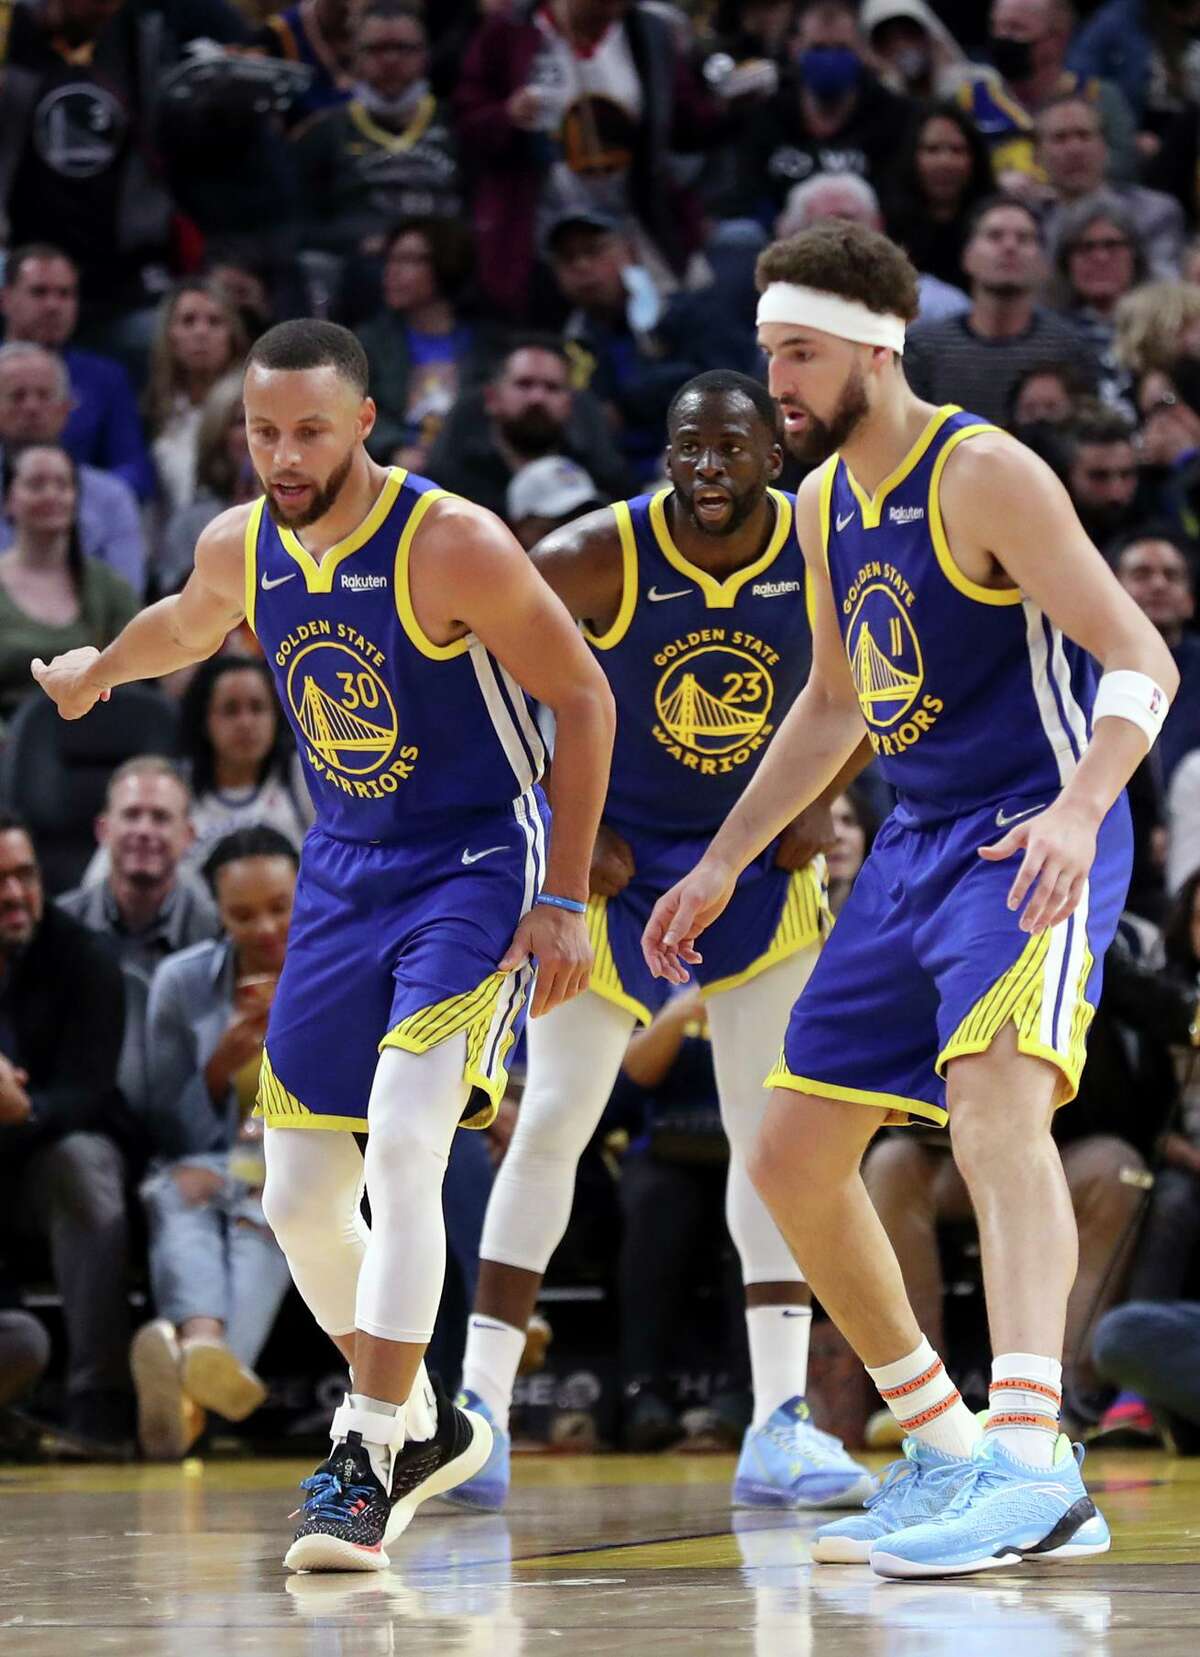 Golden State Warriors 2022 Championship: Celebrate with Hats, Shirts and  Gear - Sports Illustrated